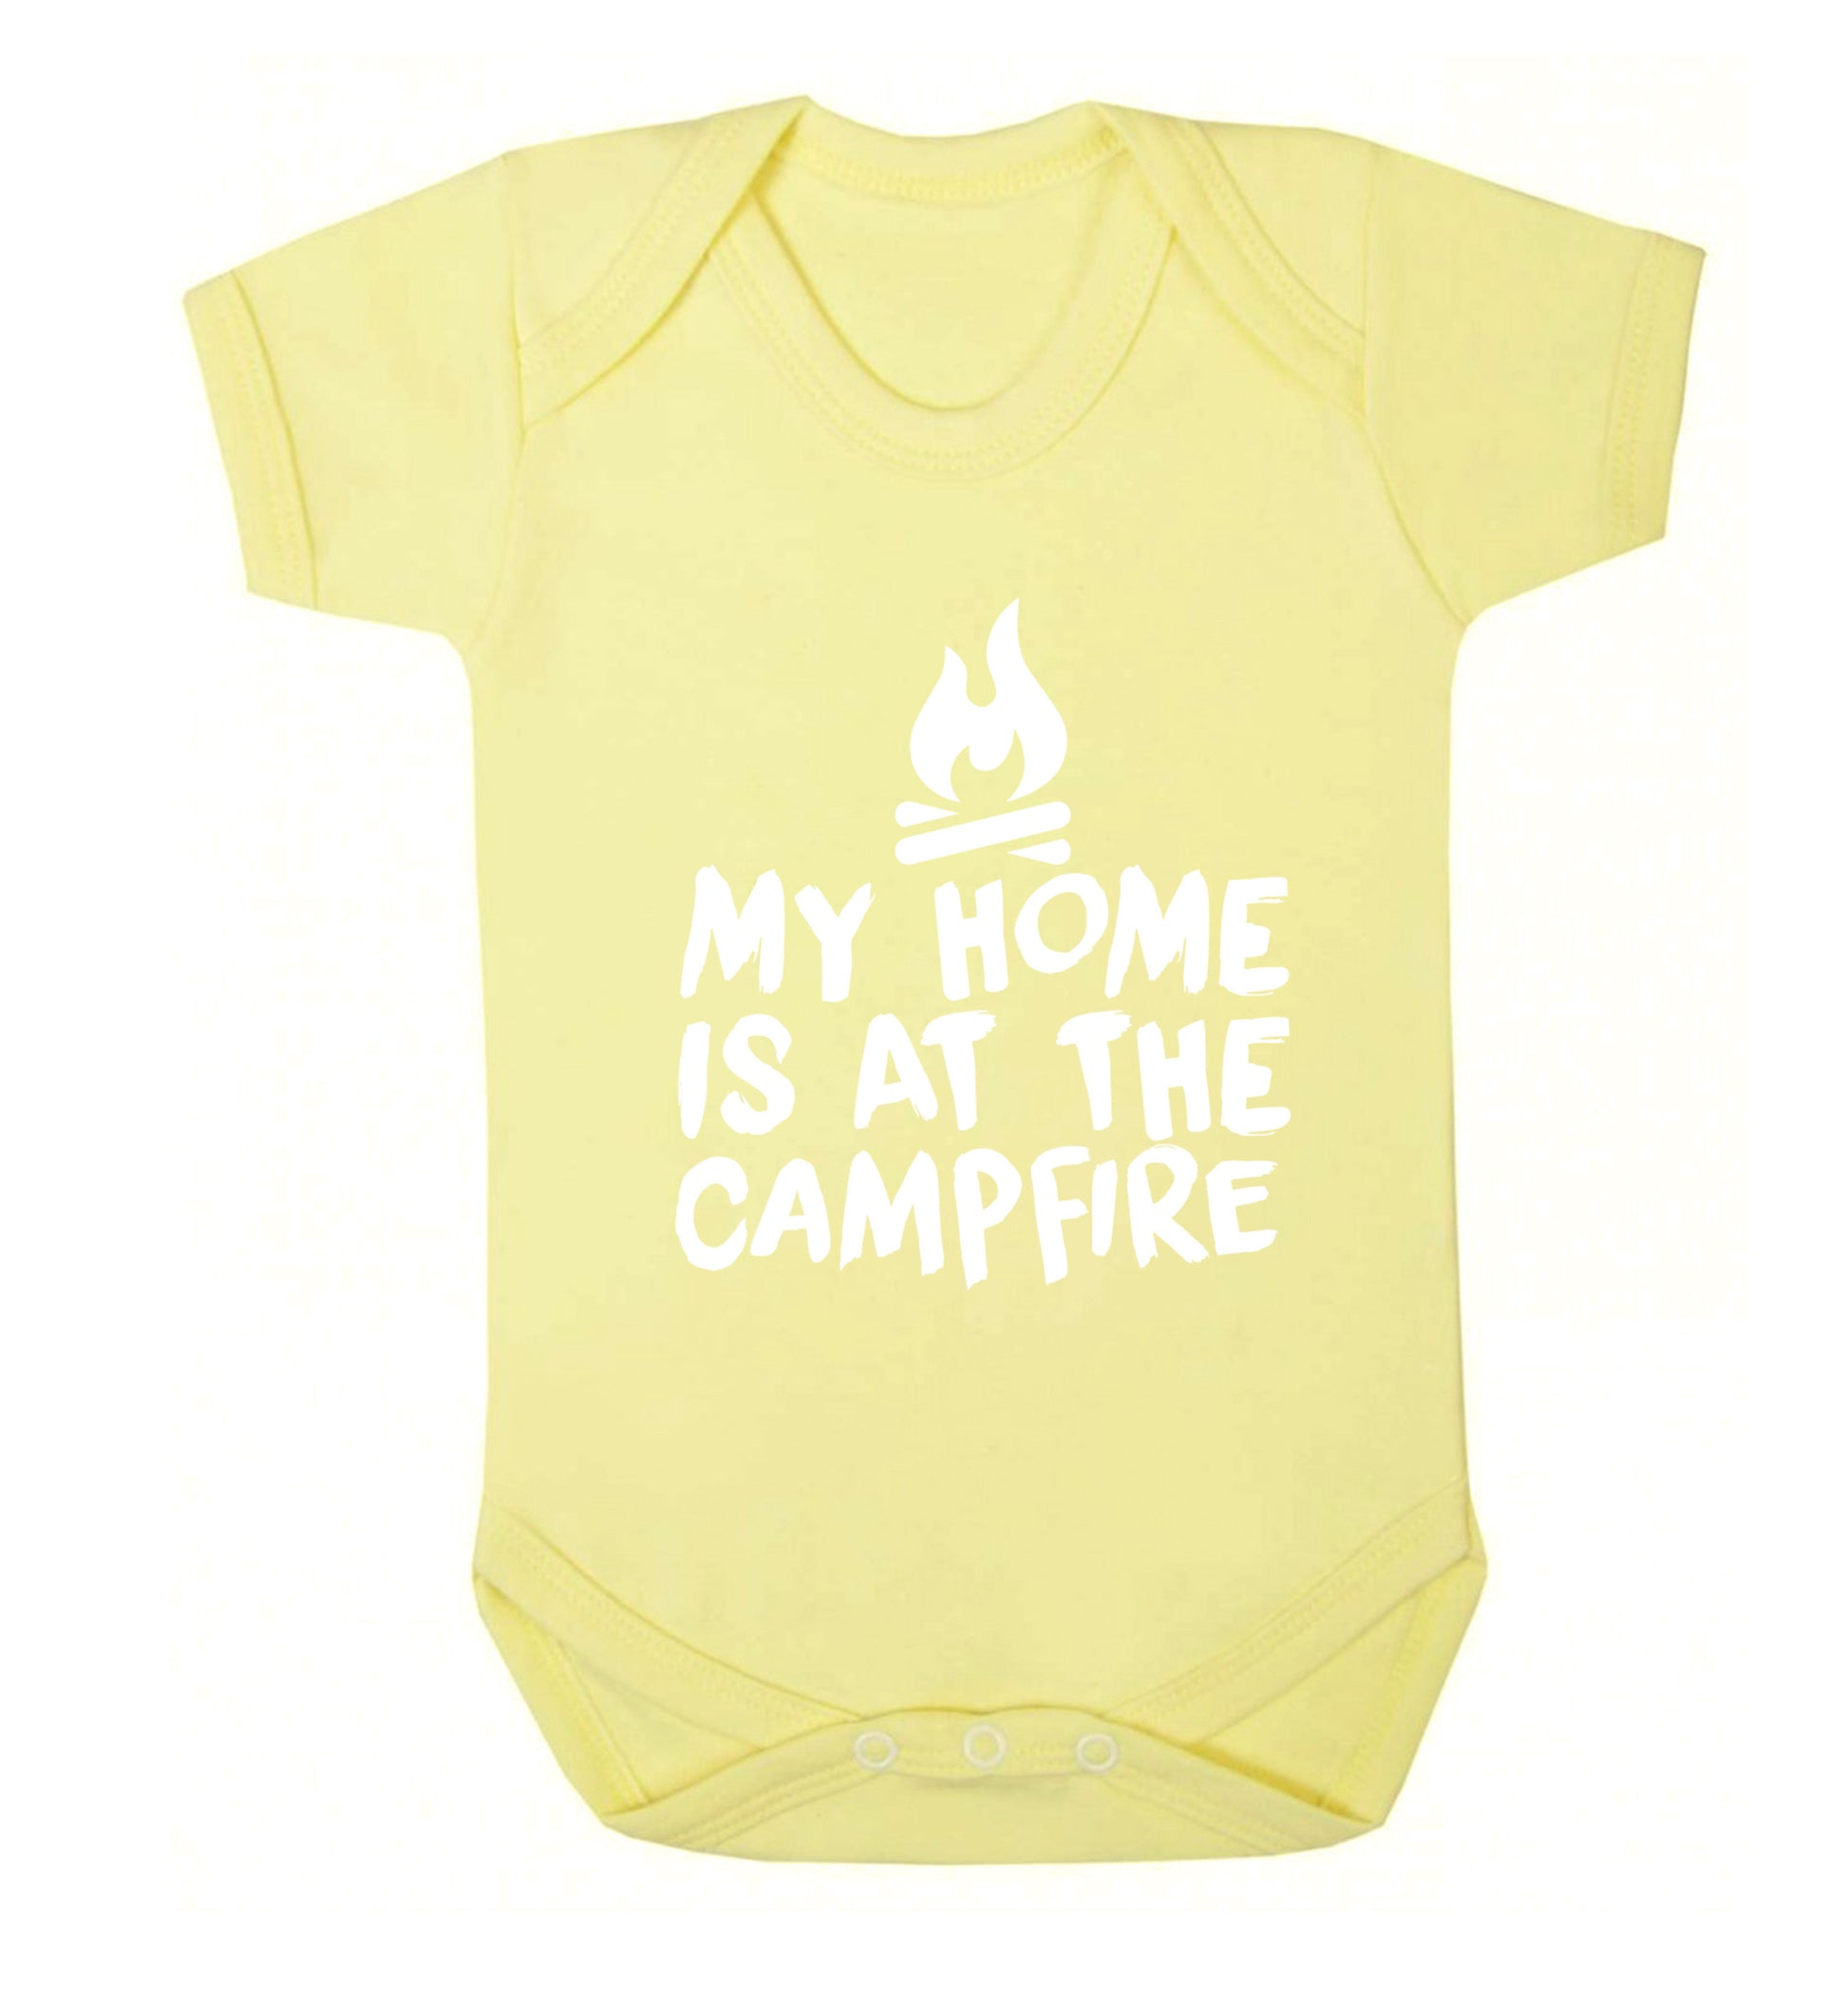 My home is at the campfire Baby Vest pale yellow 18-24 months